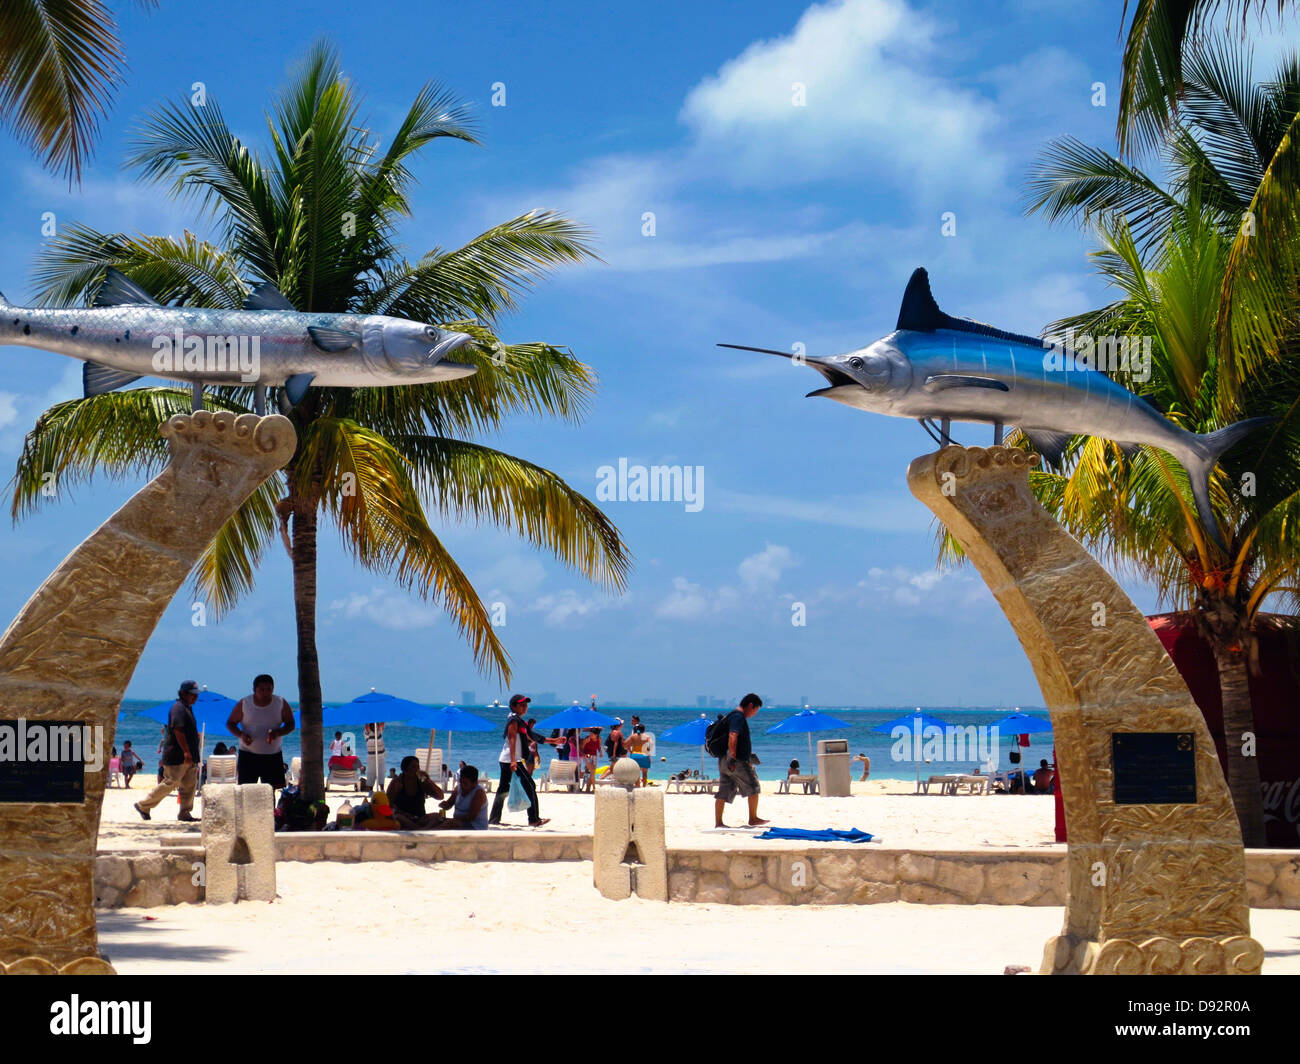 Entrance Gate with Fish Sculptures, Playa Norte, Isla Mujeres, Yucatan, Mexico Stock Photo